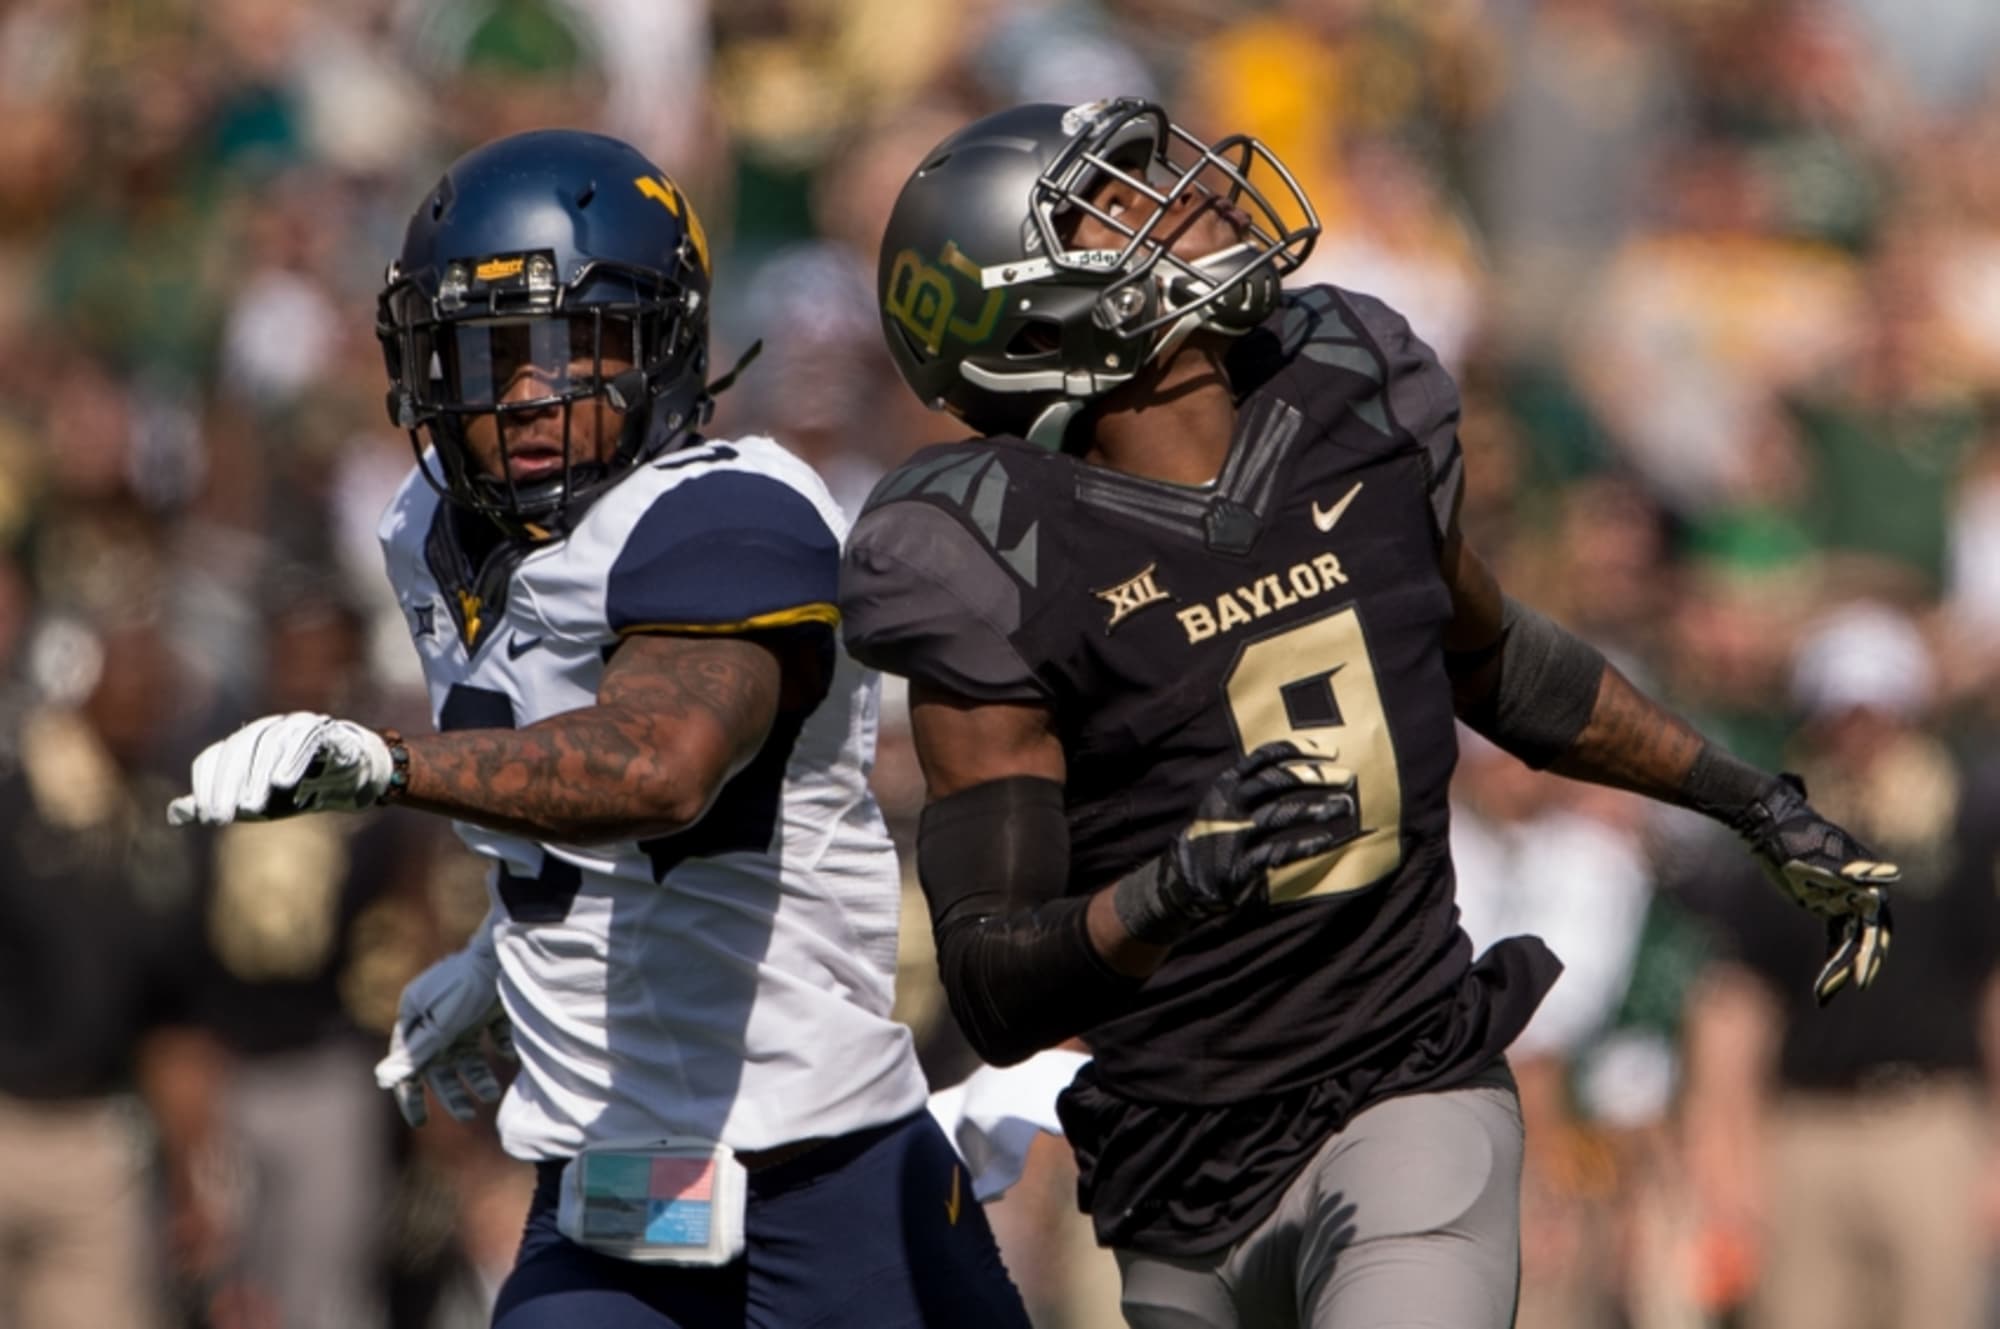 Baylor vs West Virginia Live Stream, Preview and Prediction